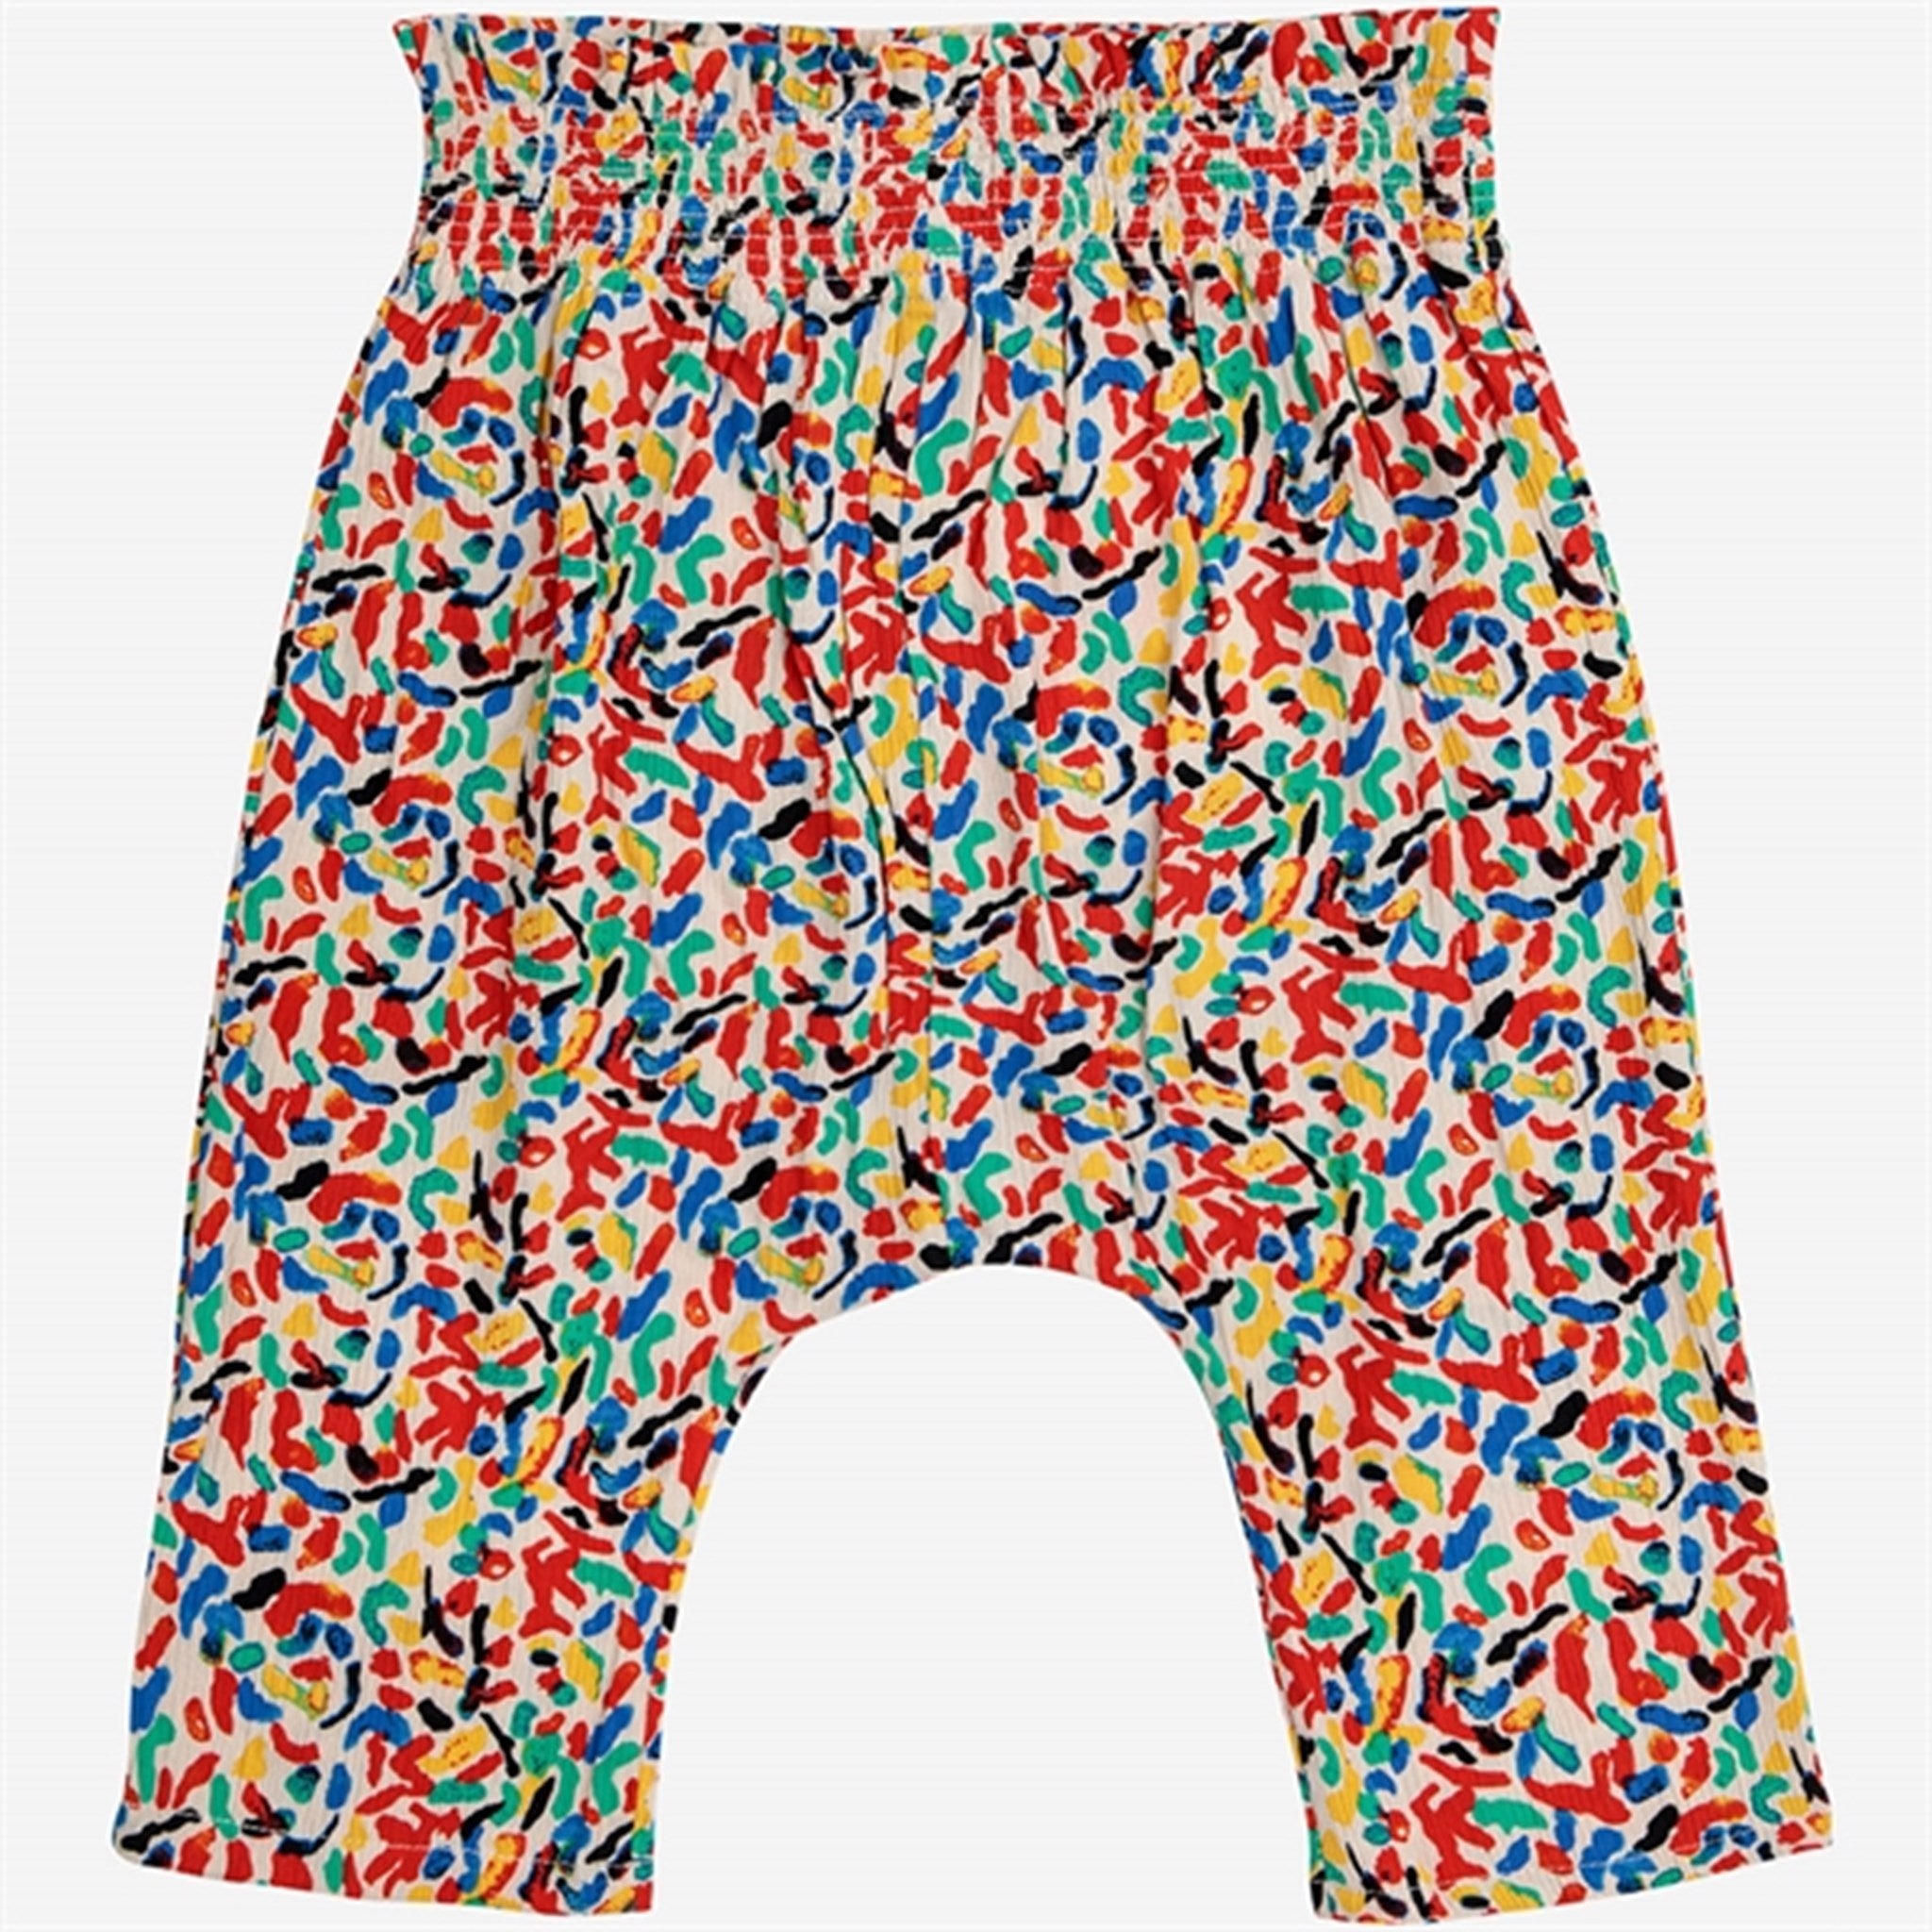 Bobo Choses Baby Confetti All Over Woven Harem Pants Baggy Multicolor 5